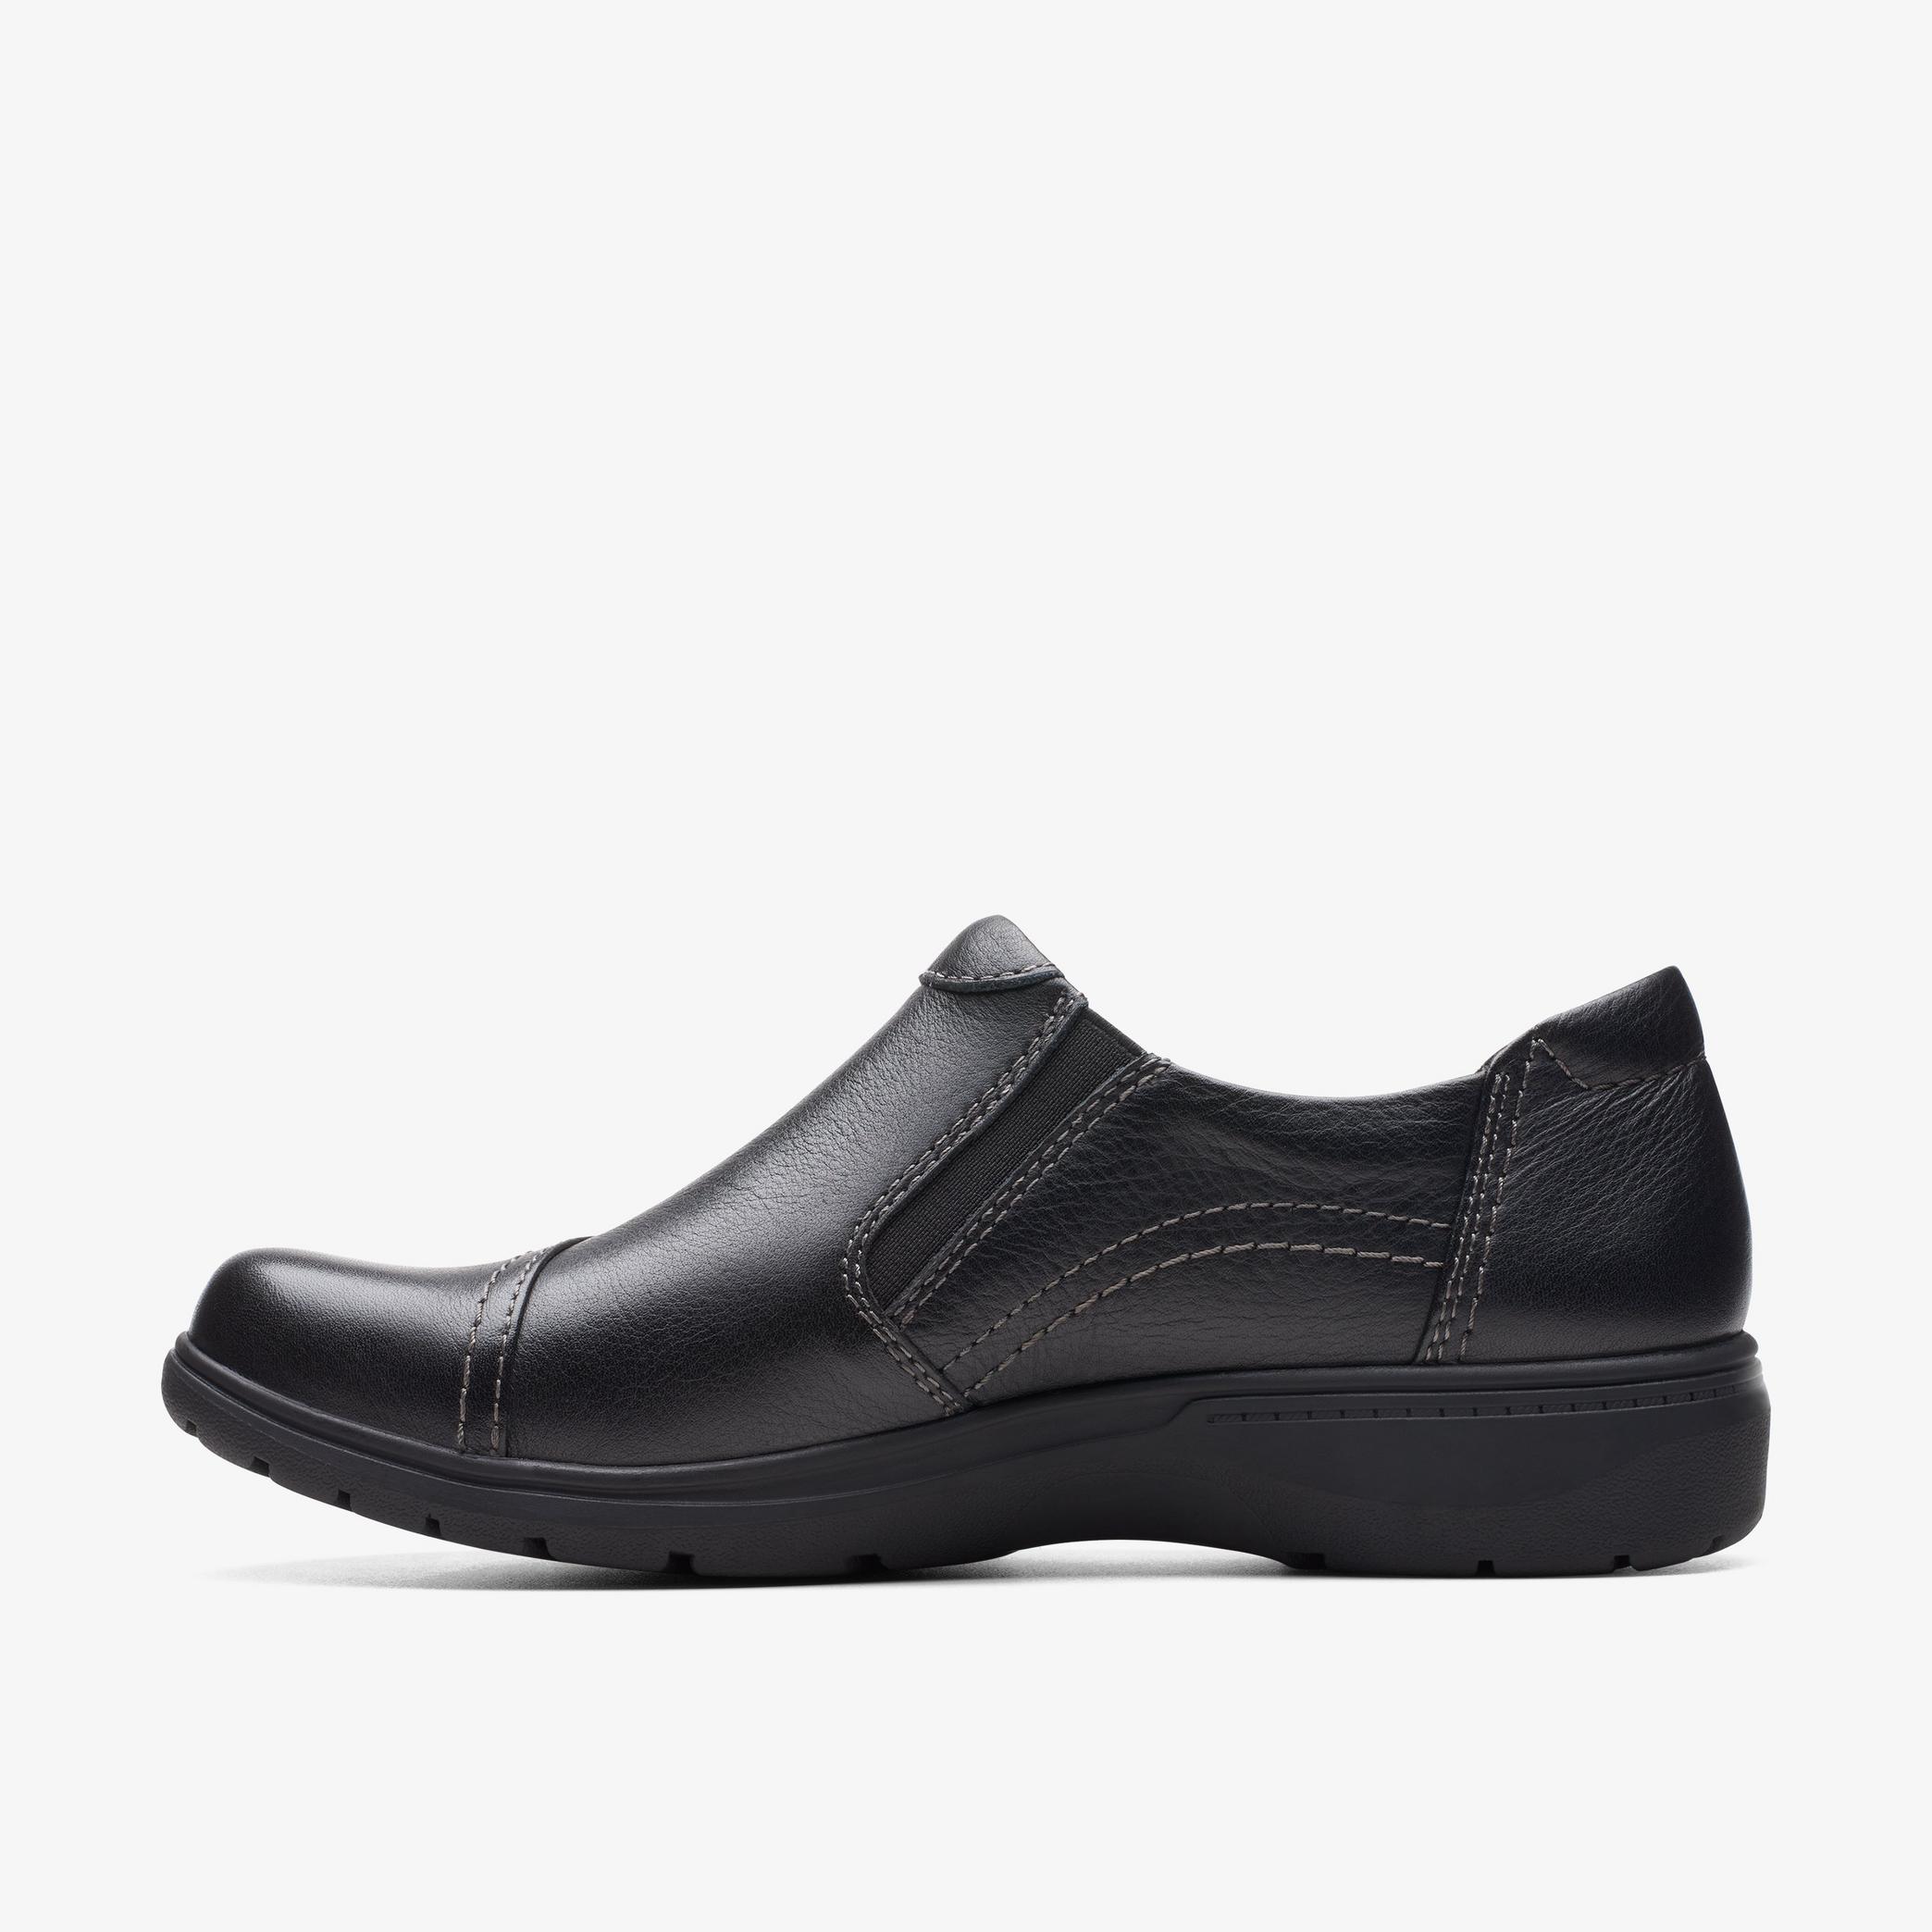 Carleigh Ray Black Leather Slip Ons, view 2 of 6